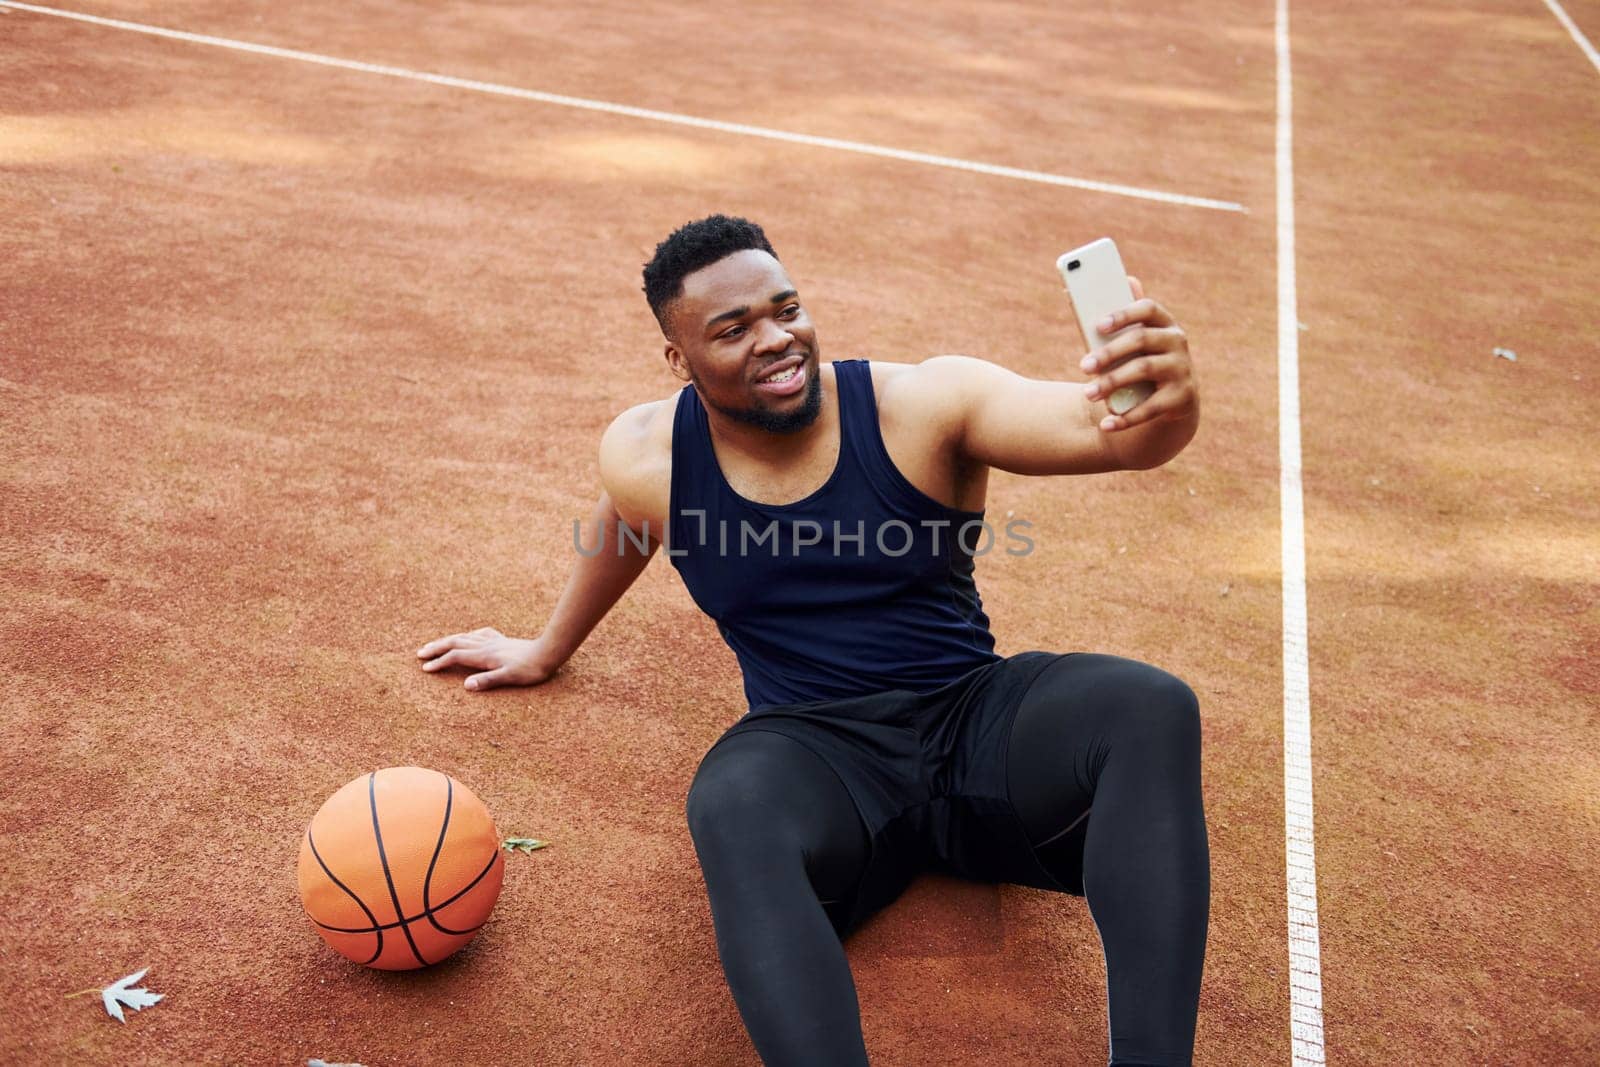 Making selfie. African american man plays basketball on the court outdoors.